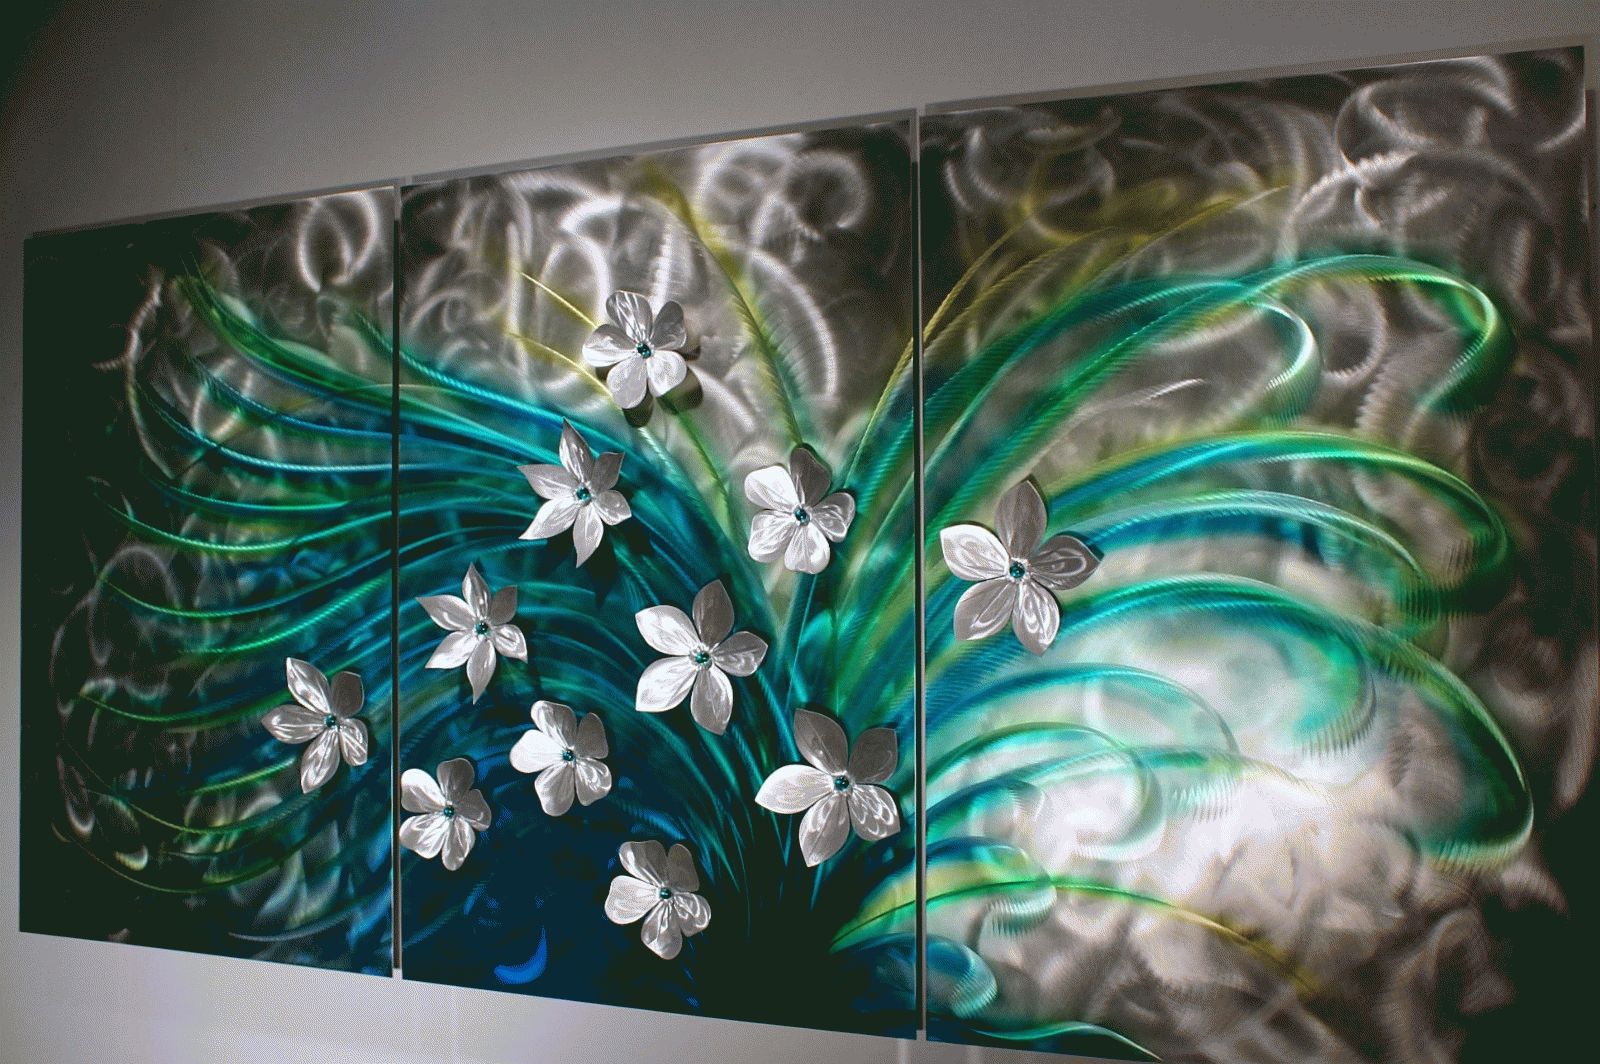 Floral Art, Metal Wall Sculpture, Abstract Home Decor Painting With Regard To Most Up To Date Large Metal Wall Art Sculptures (View 19 of 20)